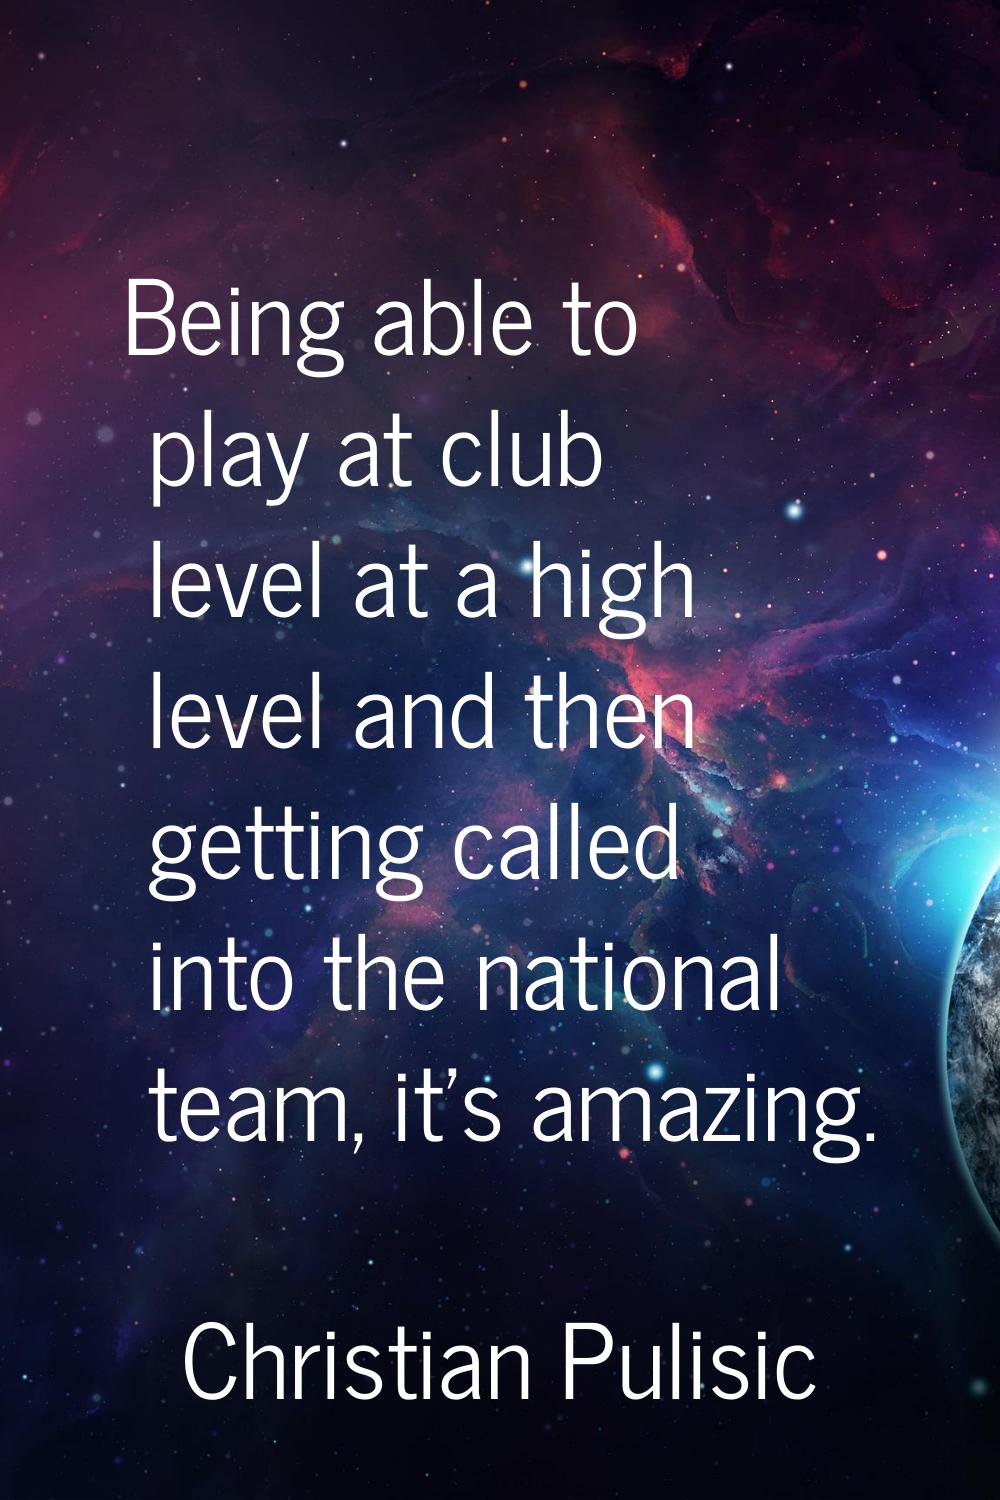 Being able to play at club level at a high level and then getting called into the national team, it